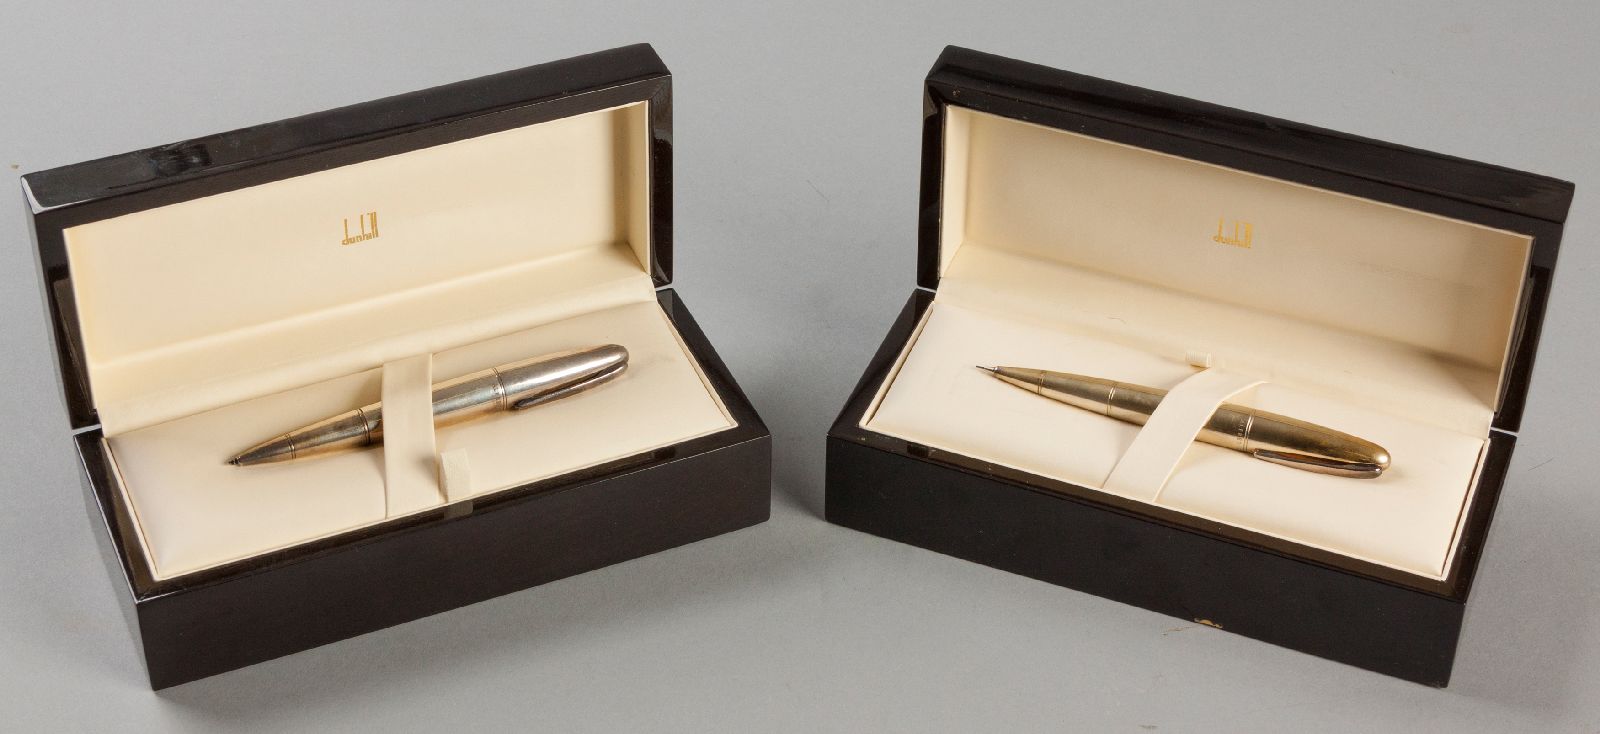 AN ALFRED DUNHILL .925 STD. SILVER CLUTCH PROPELLING PENCIL AND BALL POINT PEN, both in leather-